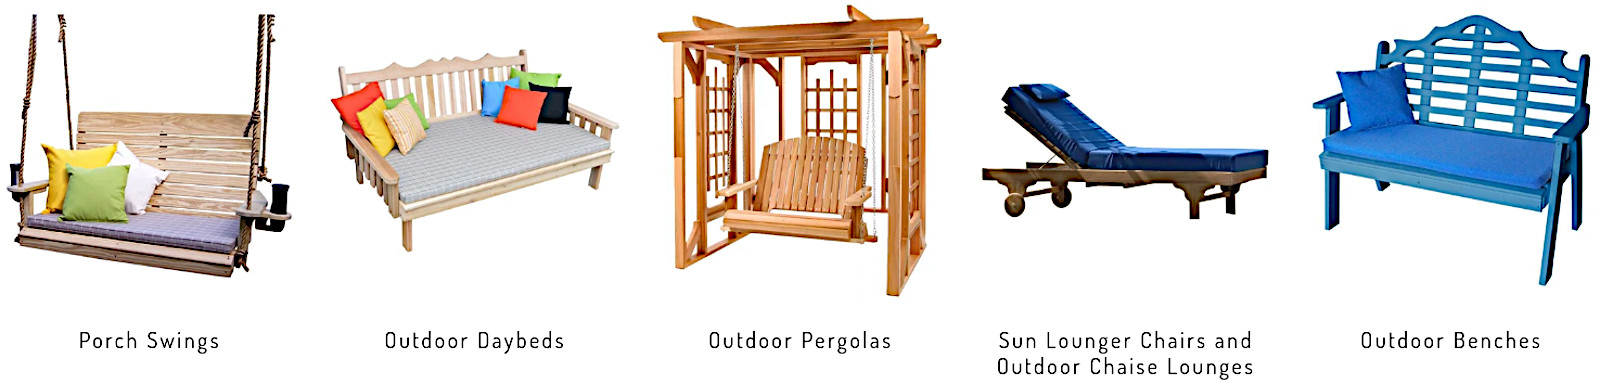 Promotional Price outdoor furniture